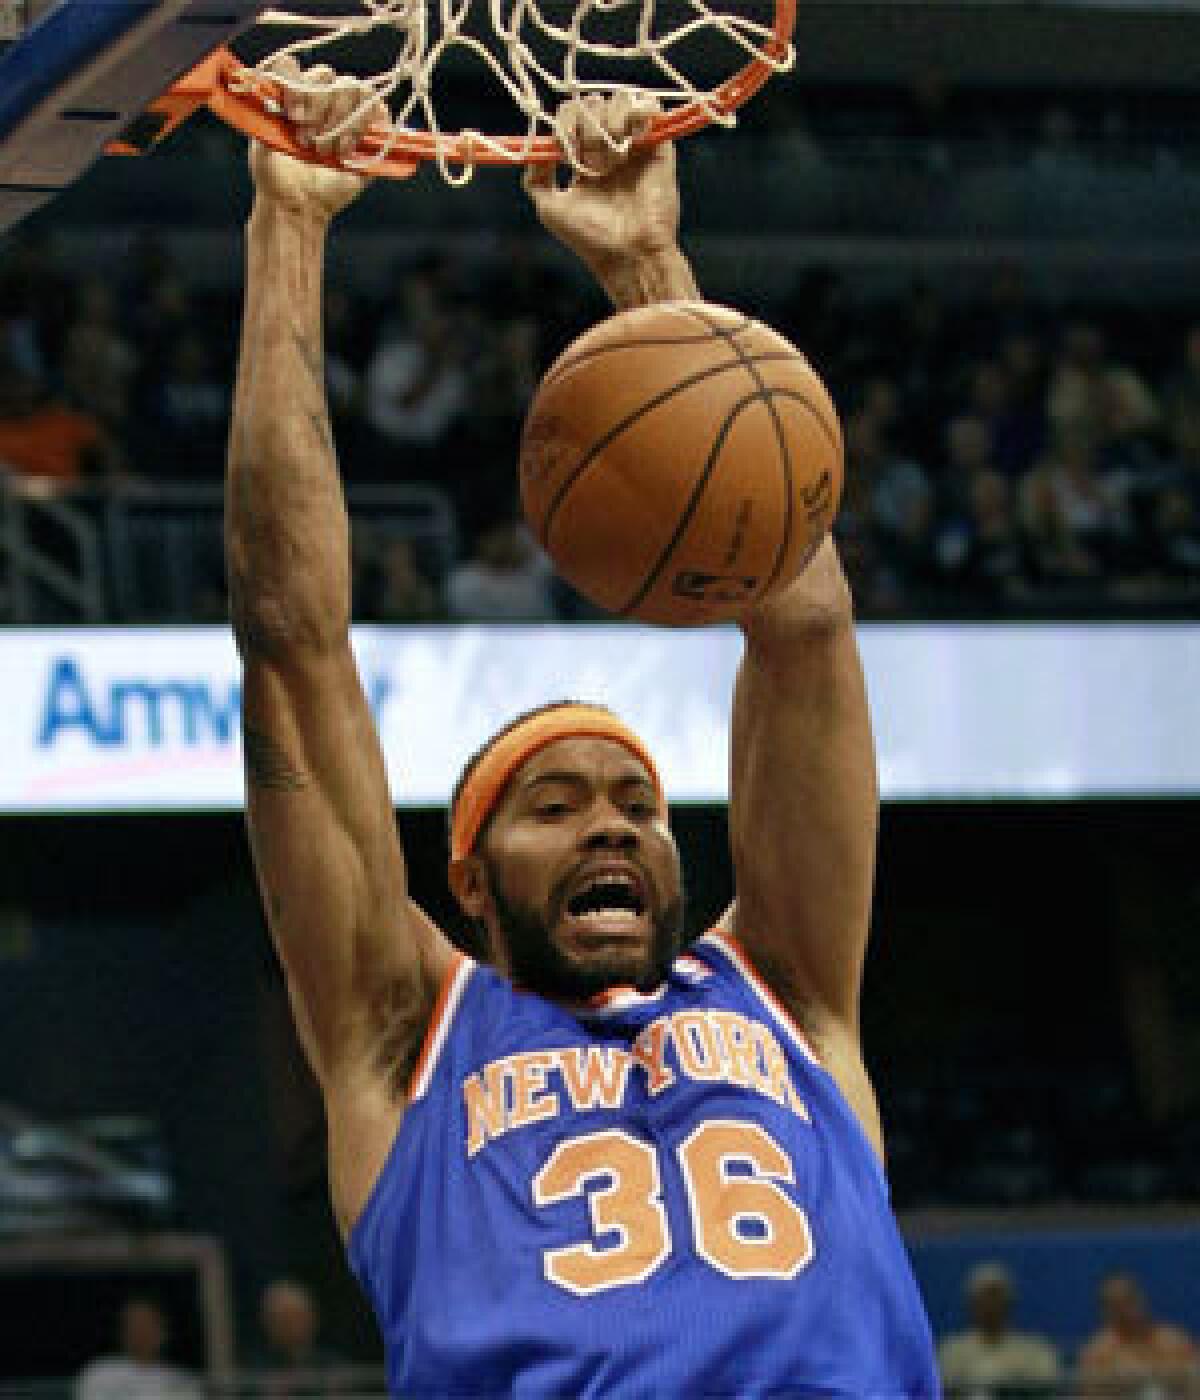 New York Knicks' Rasheed Wallace retired from the NBA for a second time Wednesday.